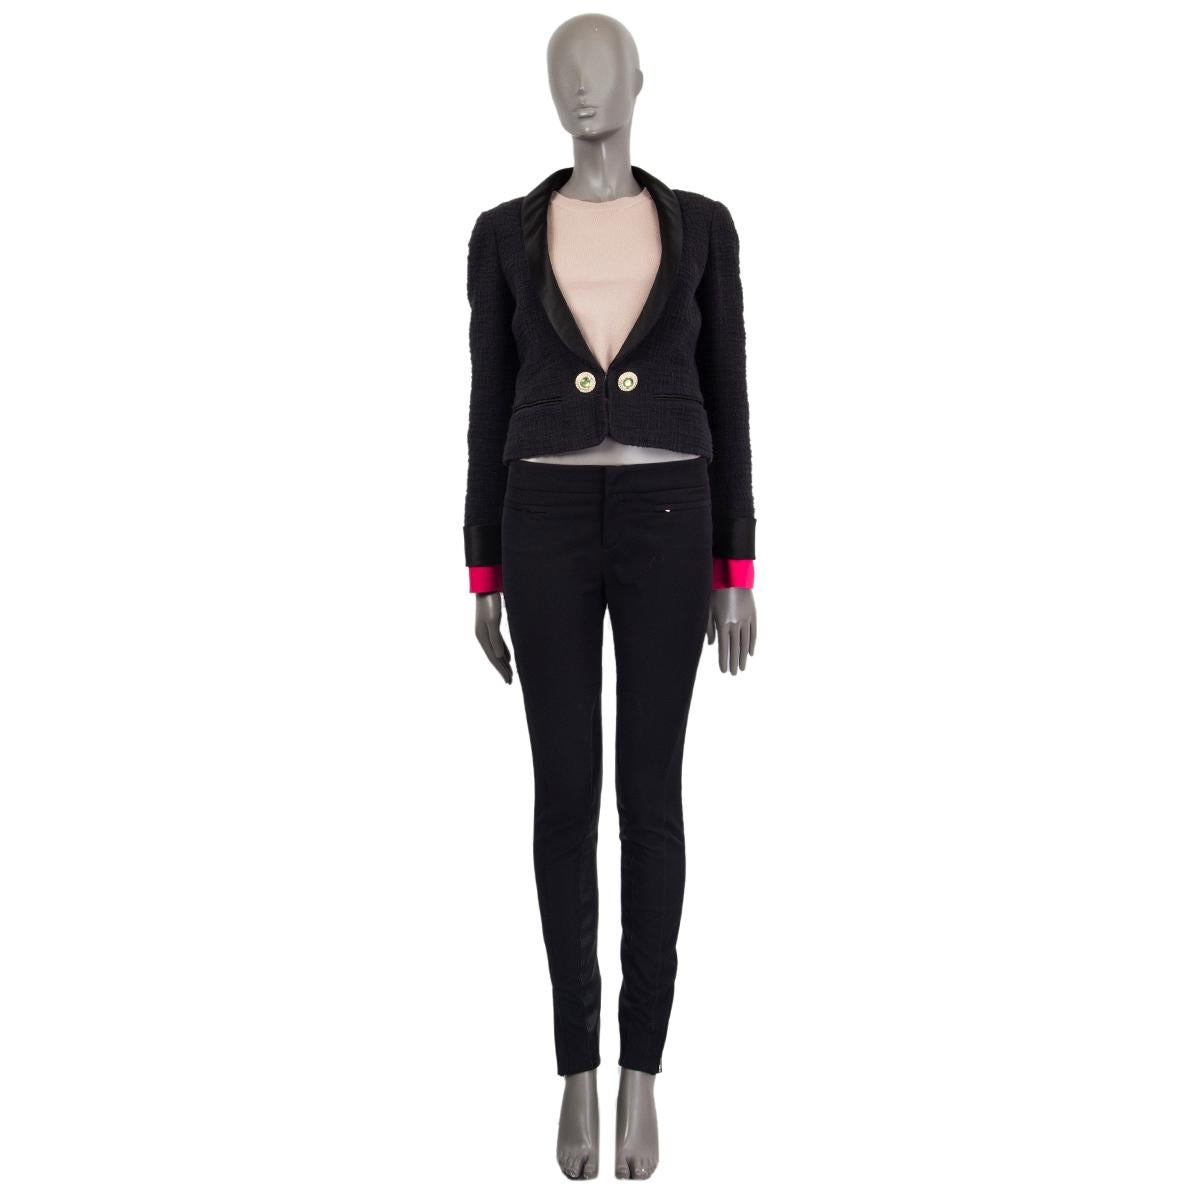 Chanel tweed dinner jacket in black cotton (100%) with satin shawl collar and cuffs. Detachable hot pink silk cuffs, rhinestone and faux pearl embellished buttons, slit pockets (still sewn shut. Closes with a hidden hook on the front. Lined in silk